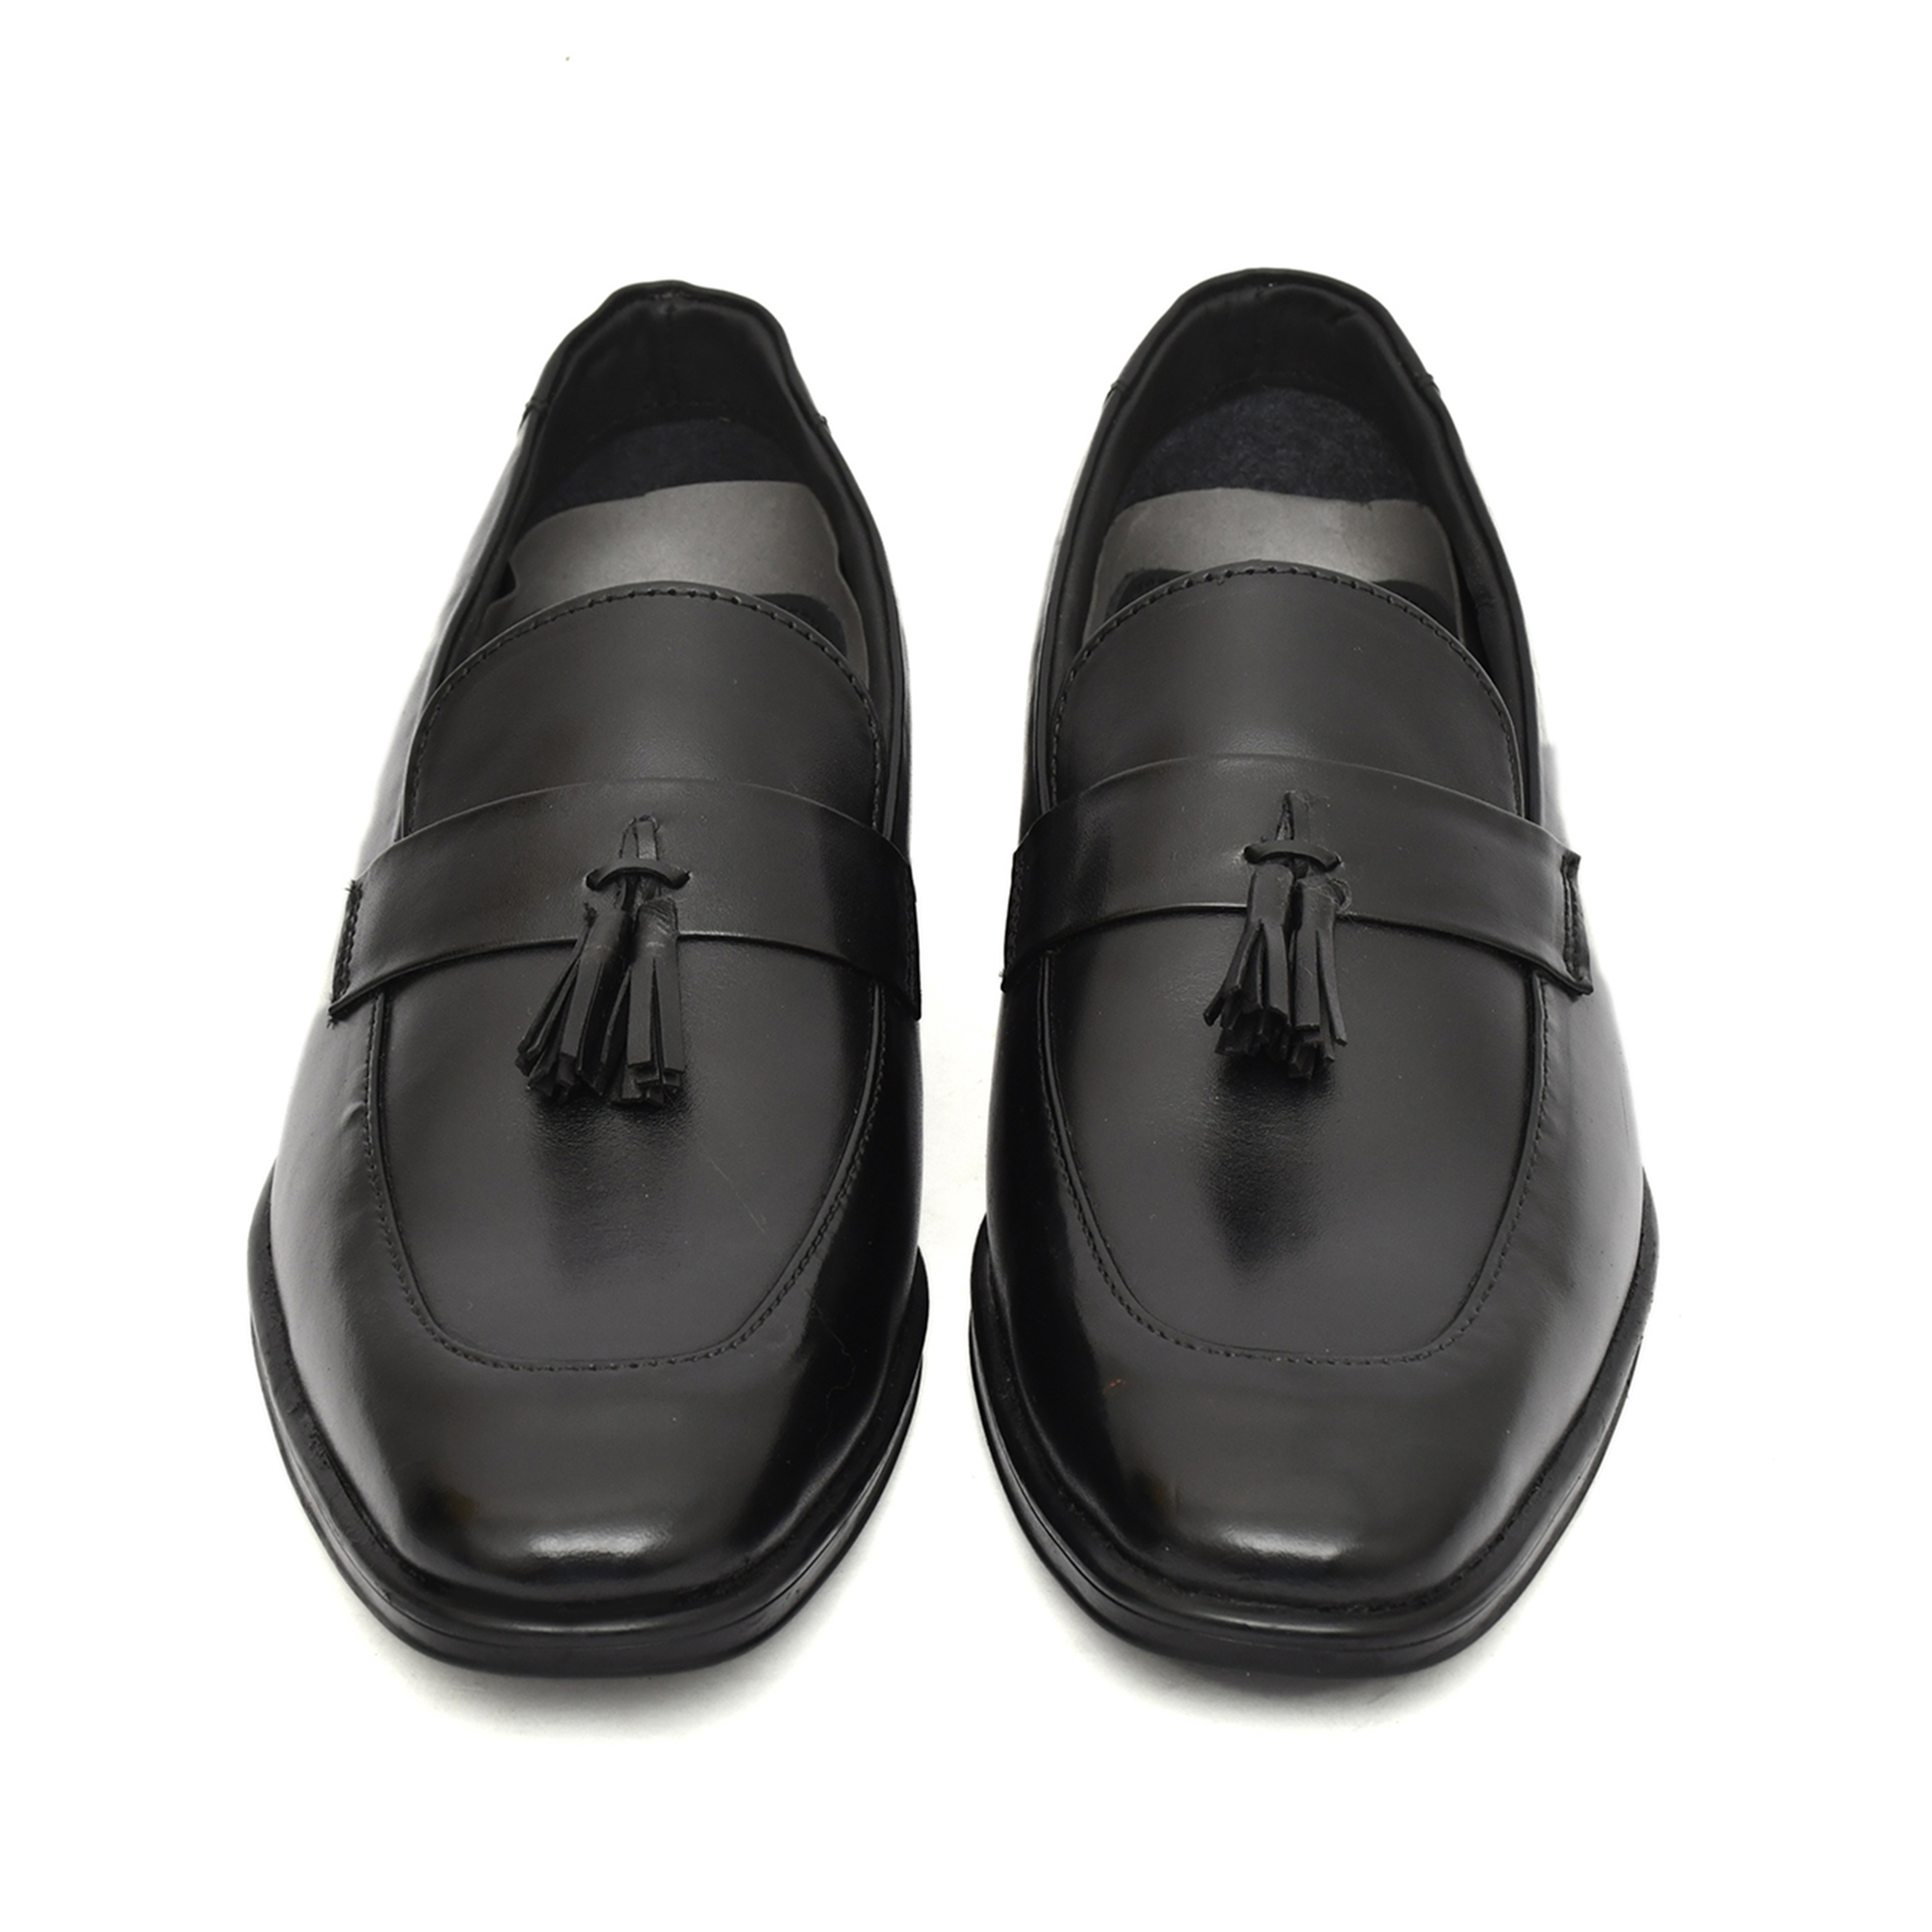 Black leather Penny Loafers with Tassel for men with Memory foam footpad by asm.